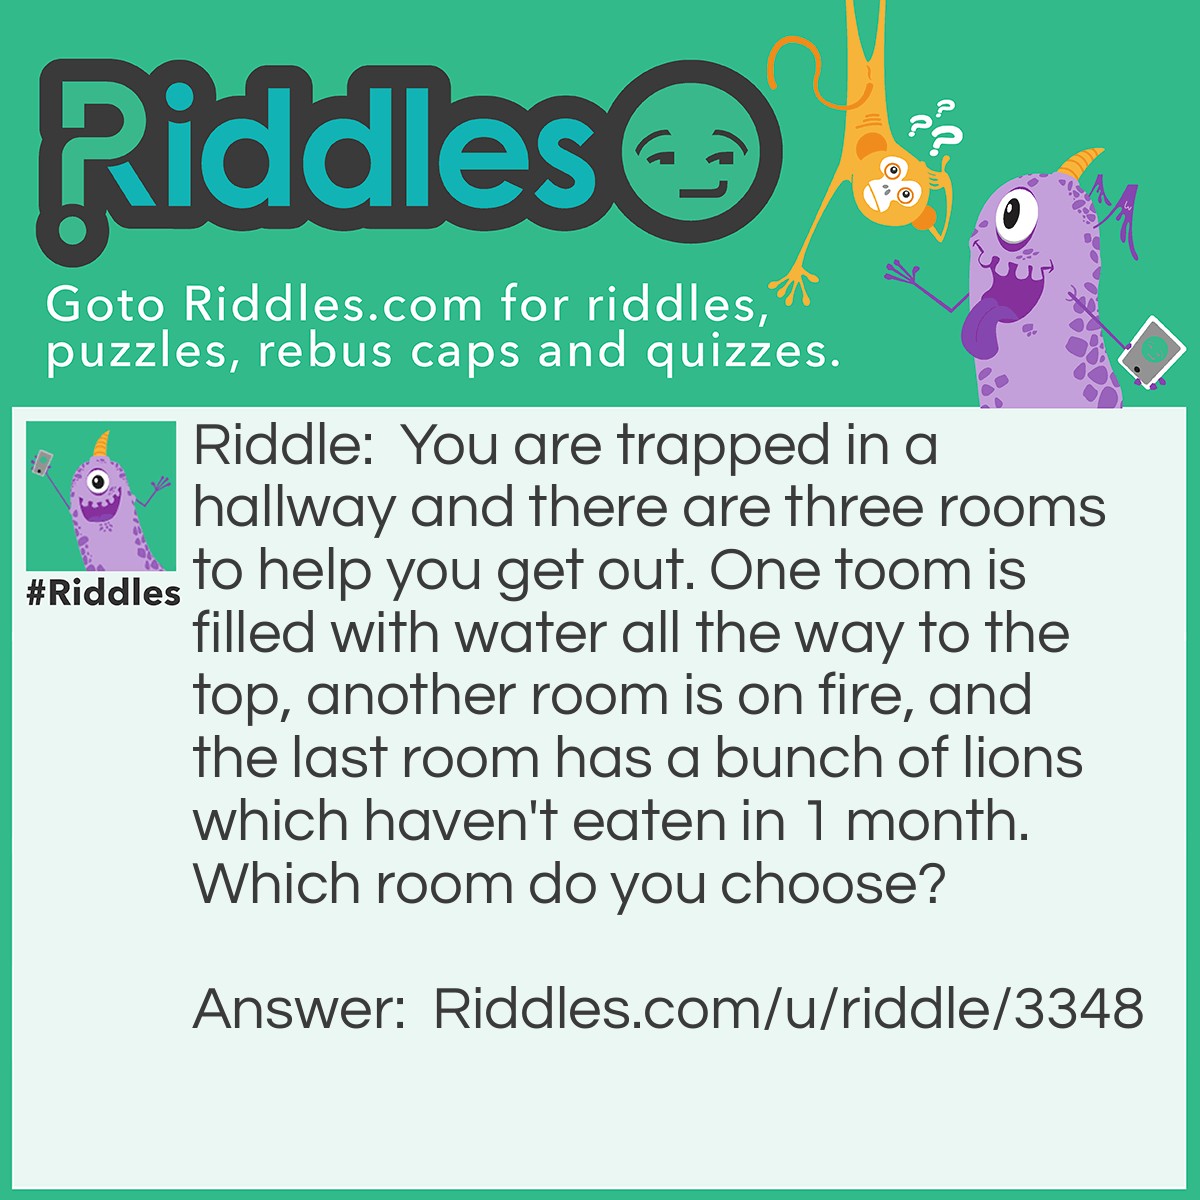 Riddle: You are trapped in a hallway and there are three rooms to help you get out. One toom is filled with water all the way to the top, another room is on fire, and the last room has a bunch of lions which haven't eaten in 1 month. Which room do you choose? Answer: The one with the lions because they haven't eaten in 1 month.